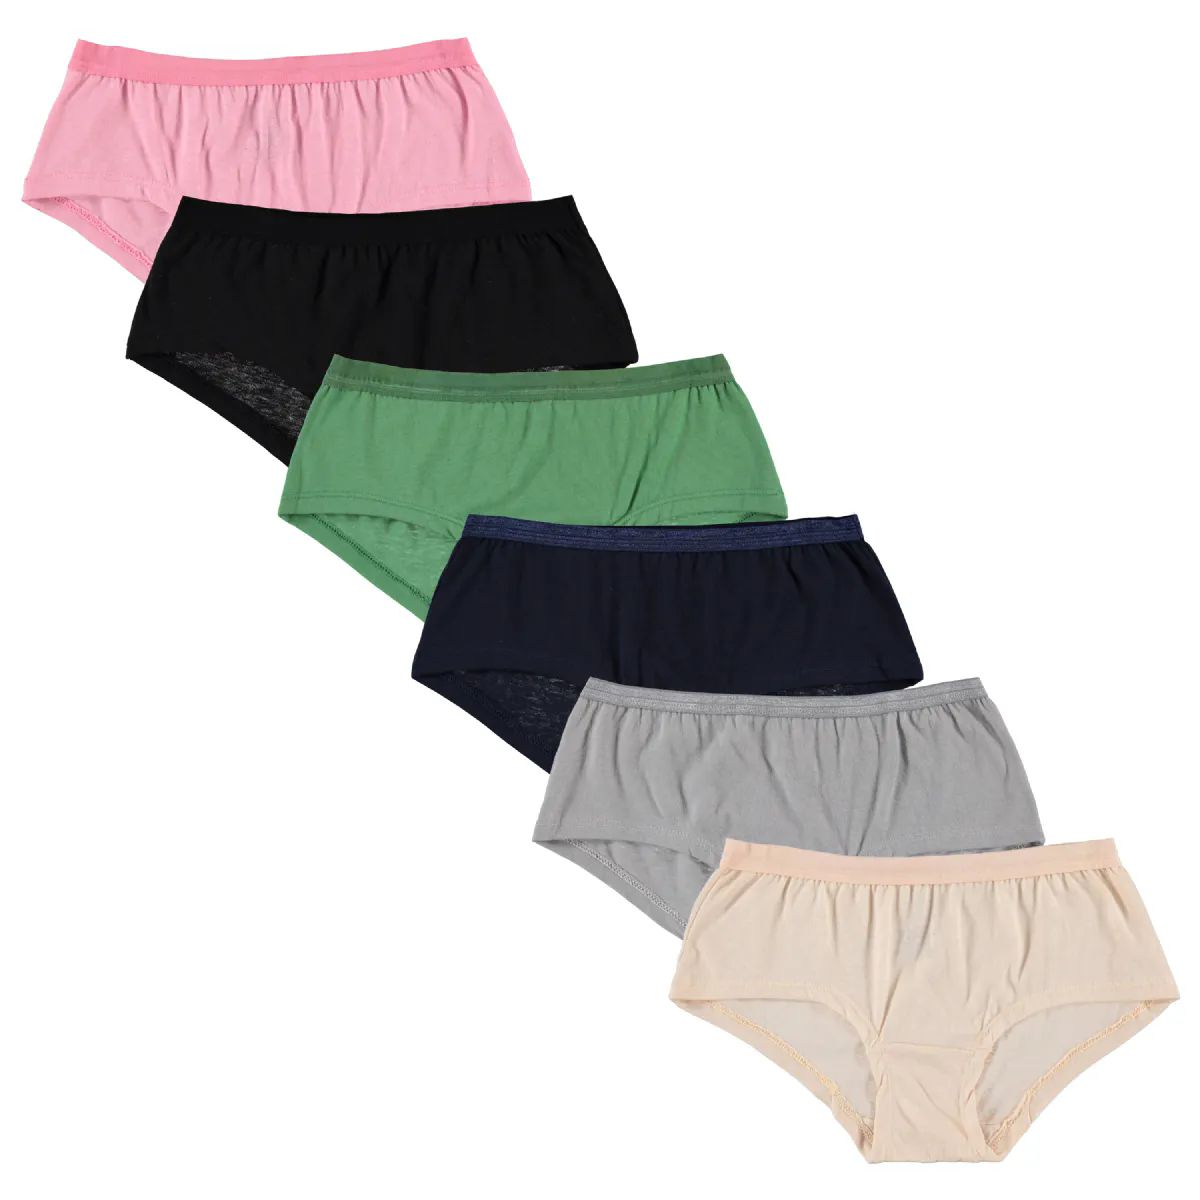 252 Wholesale Yacht & Smith Womens Cotton Lycra Underwear, Panty Briefs, 95% Cotton Soft Assorted Colors, Size Small